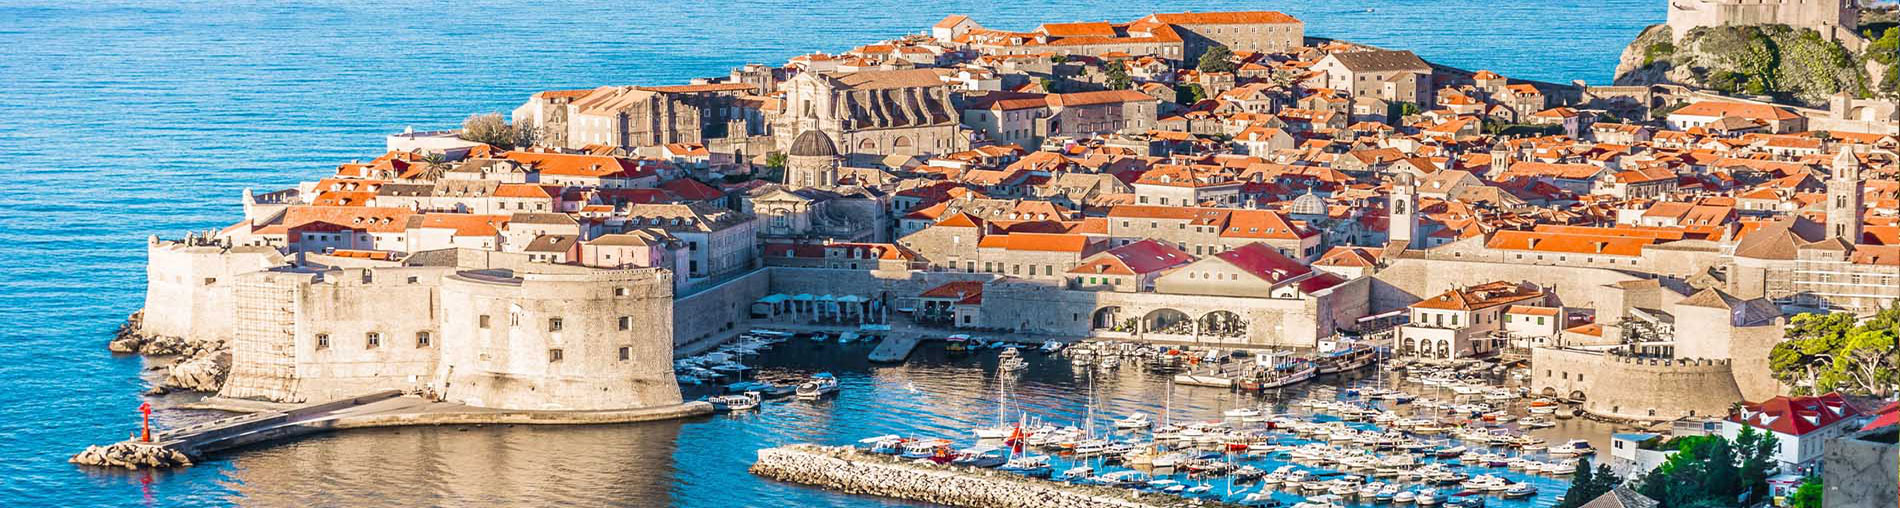 Croatia Group Tour Package From India